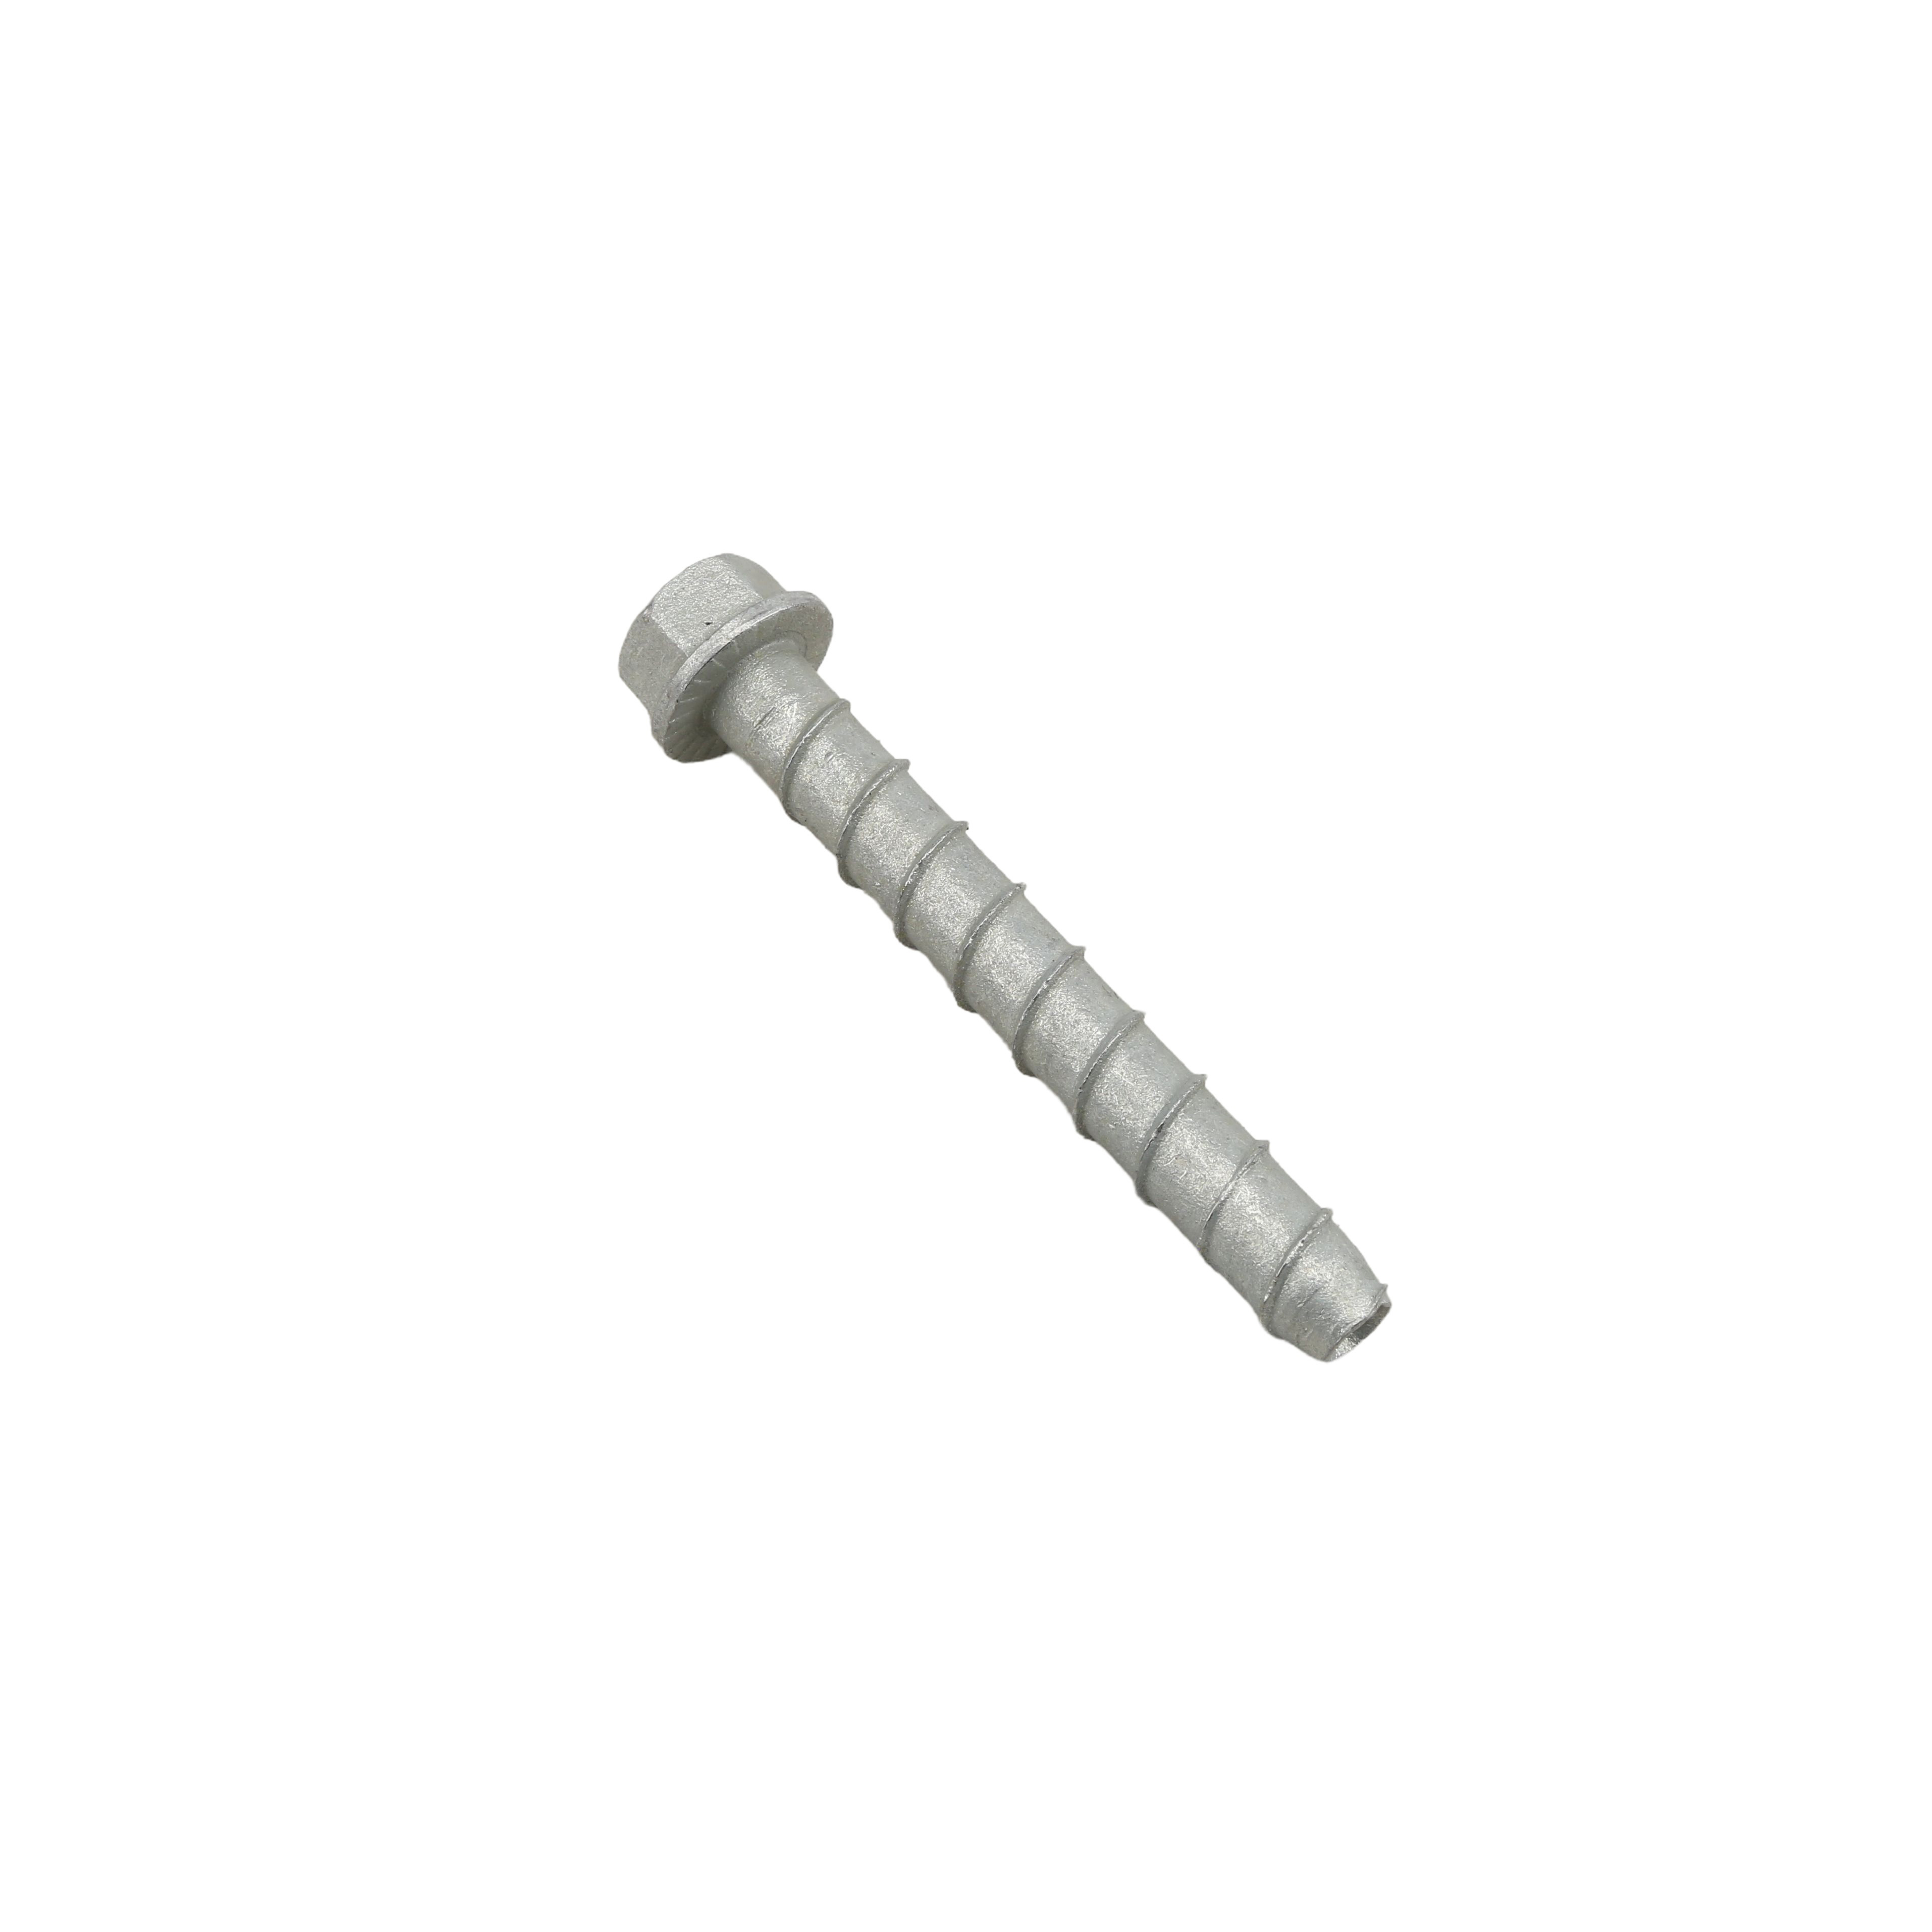 Mounting Posts Anchor Bolts